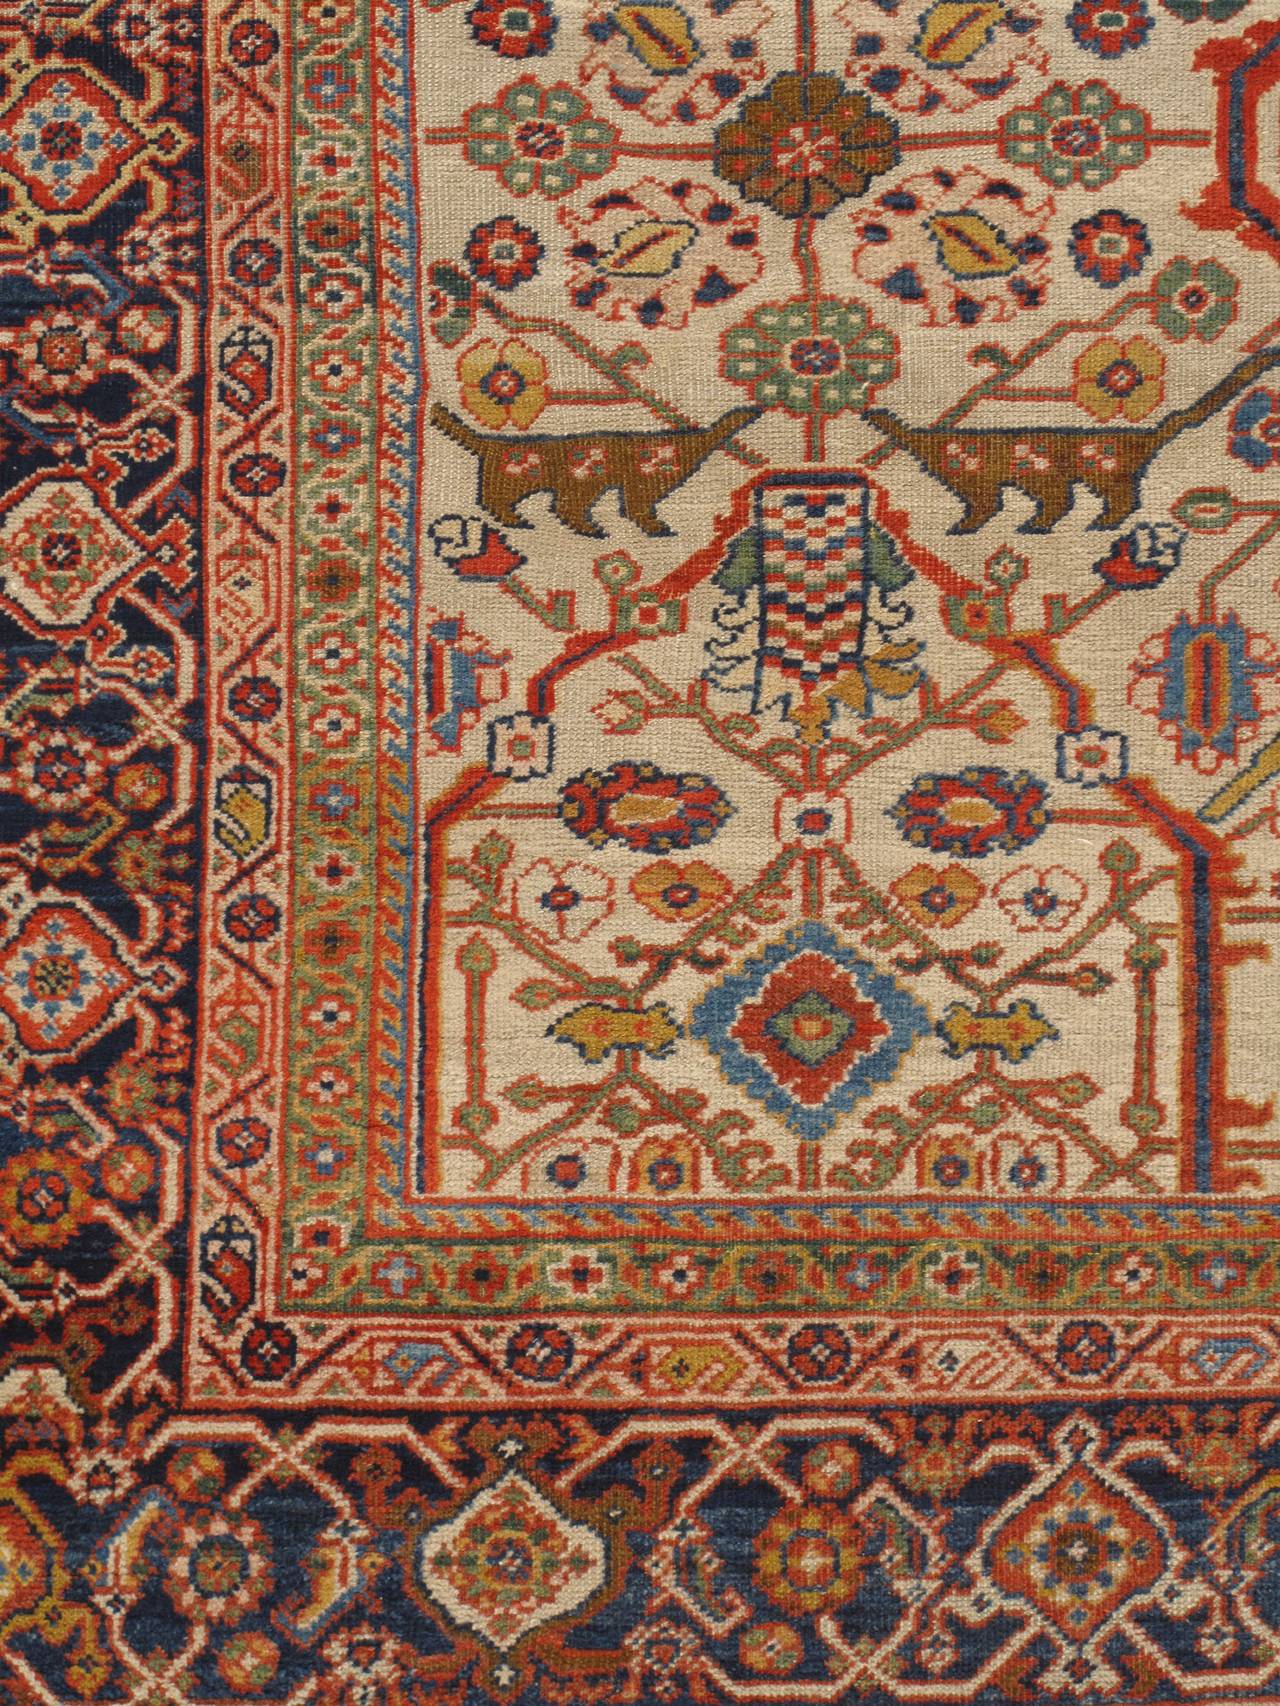 Antique Sultanabad rug carpet, circa 1890. This is a most attractive Sultanabad carpet from northwest Persia with a currently highly desirable ivory field. The pattern is a double layer lattice with palmettes, rosettes, stiff hooked leaves and tiny